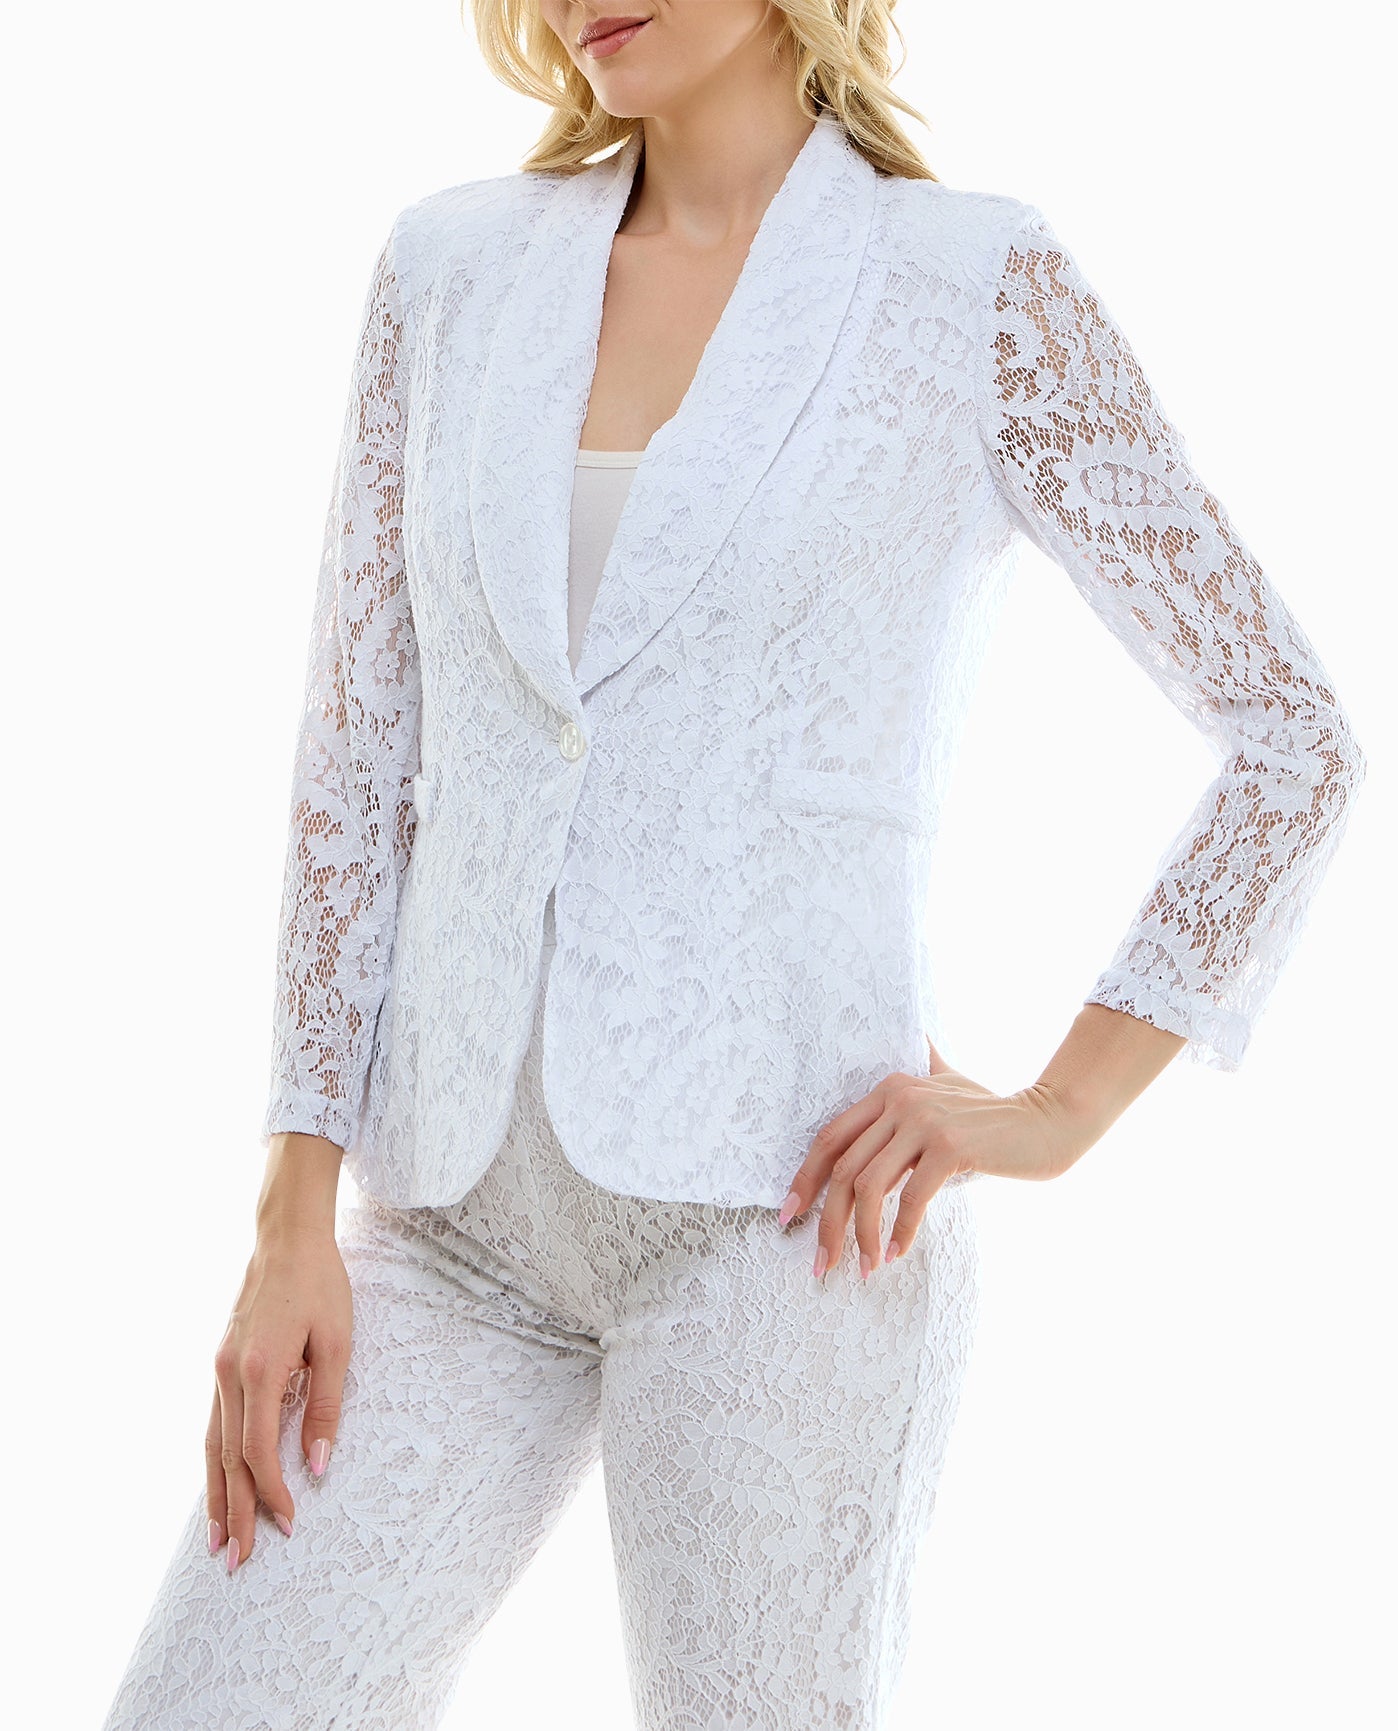 SIDE OF LILY LACE ONE BUTTON BLAZER | Brilliant White